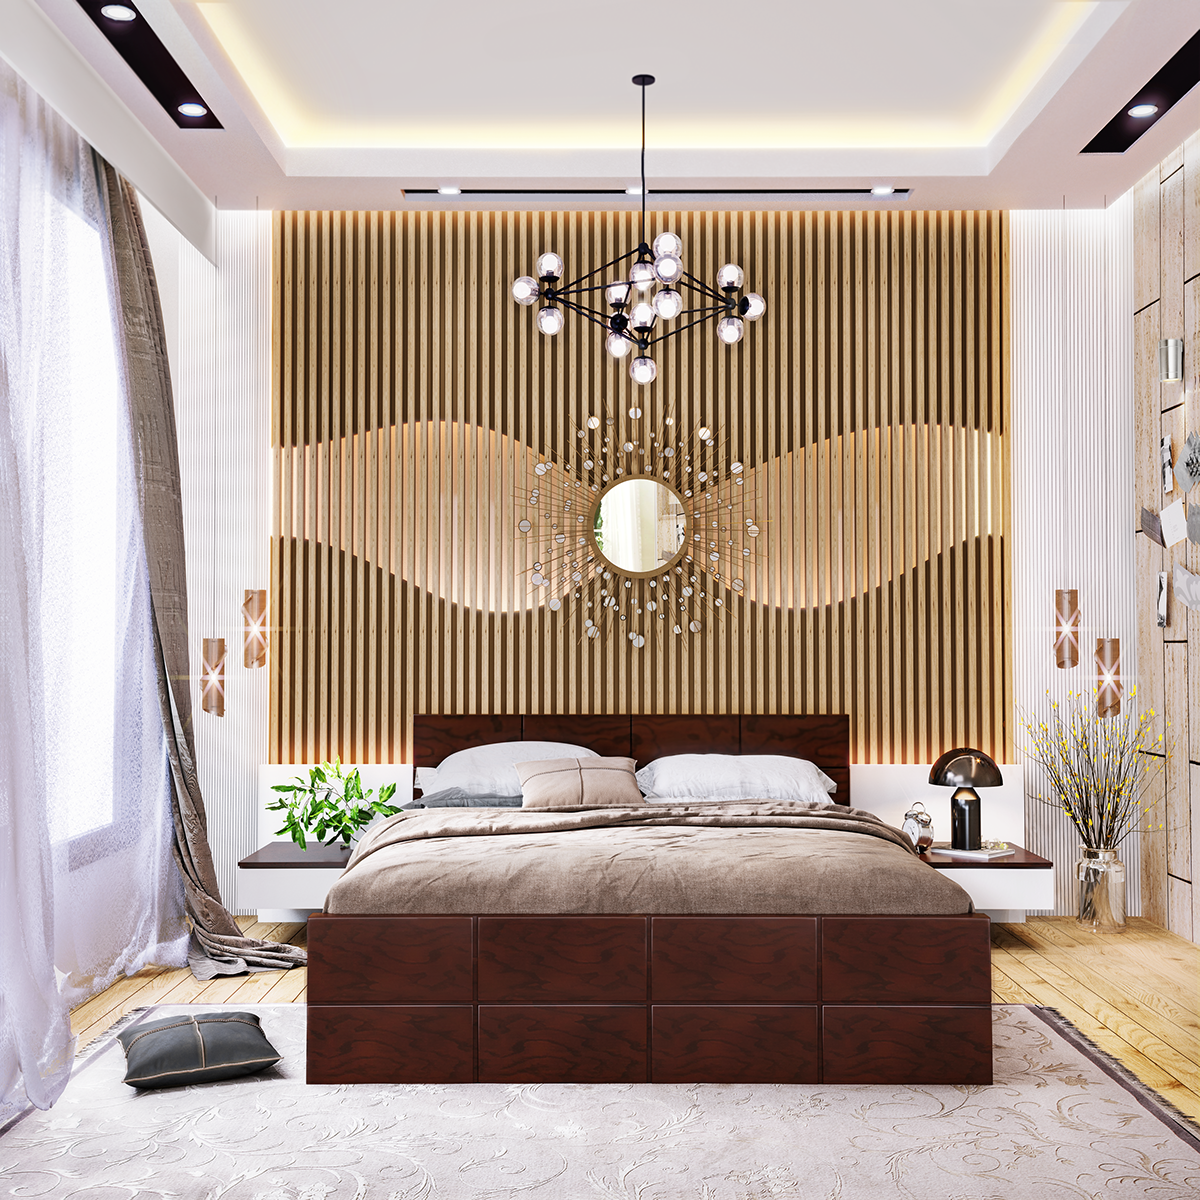 bed room realistic interior scene free download on behance